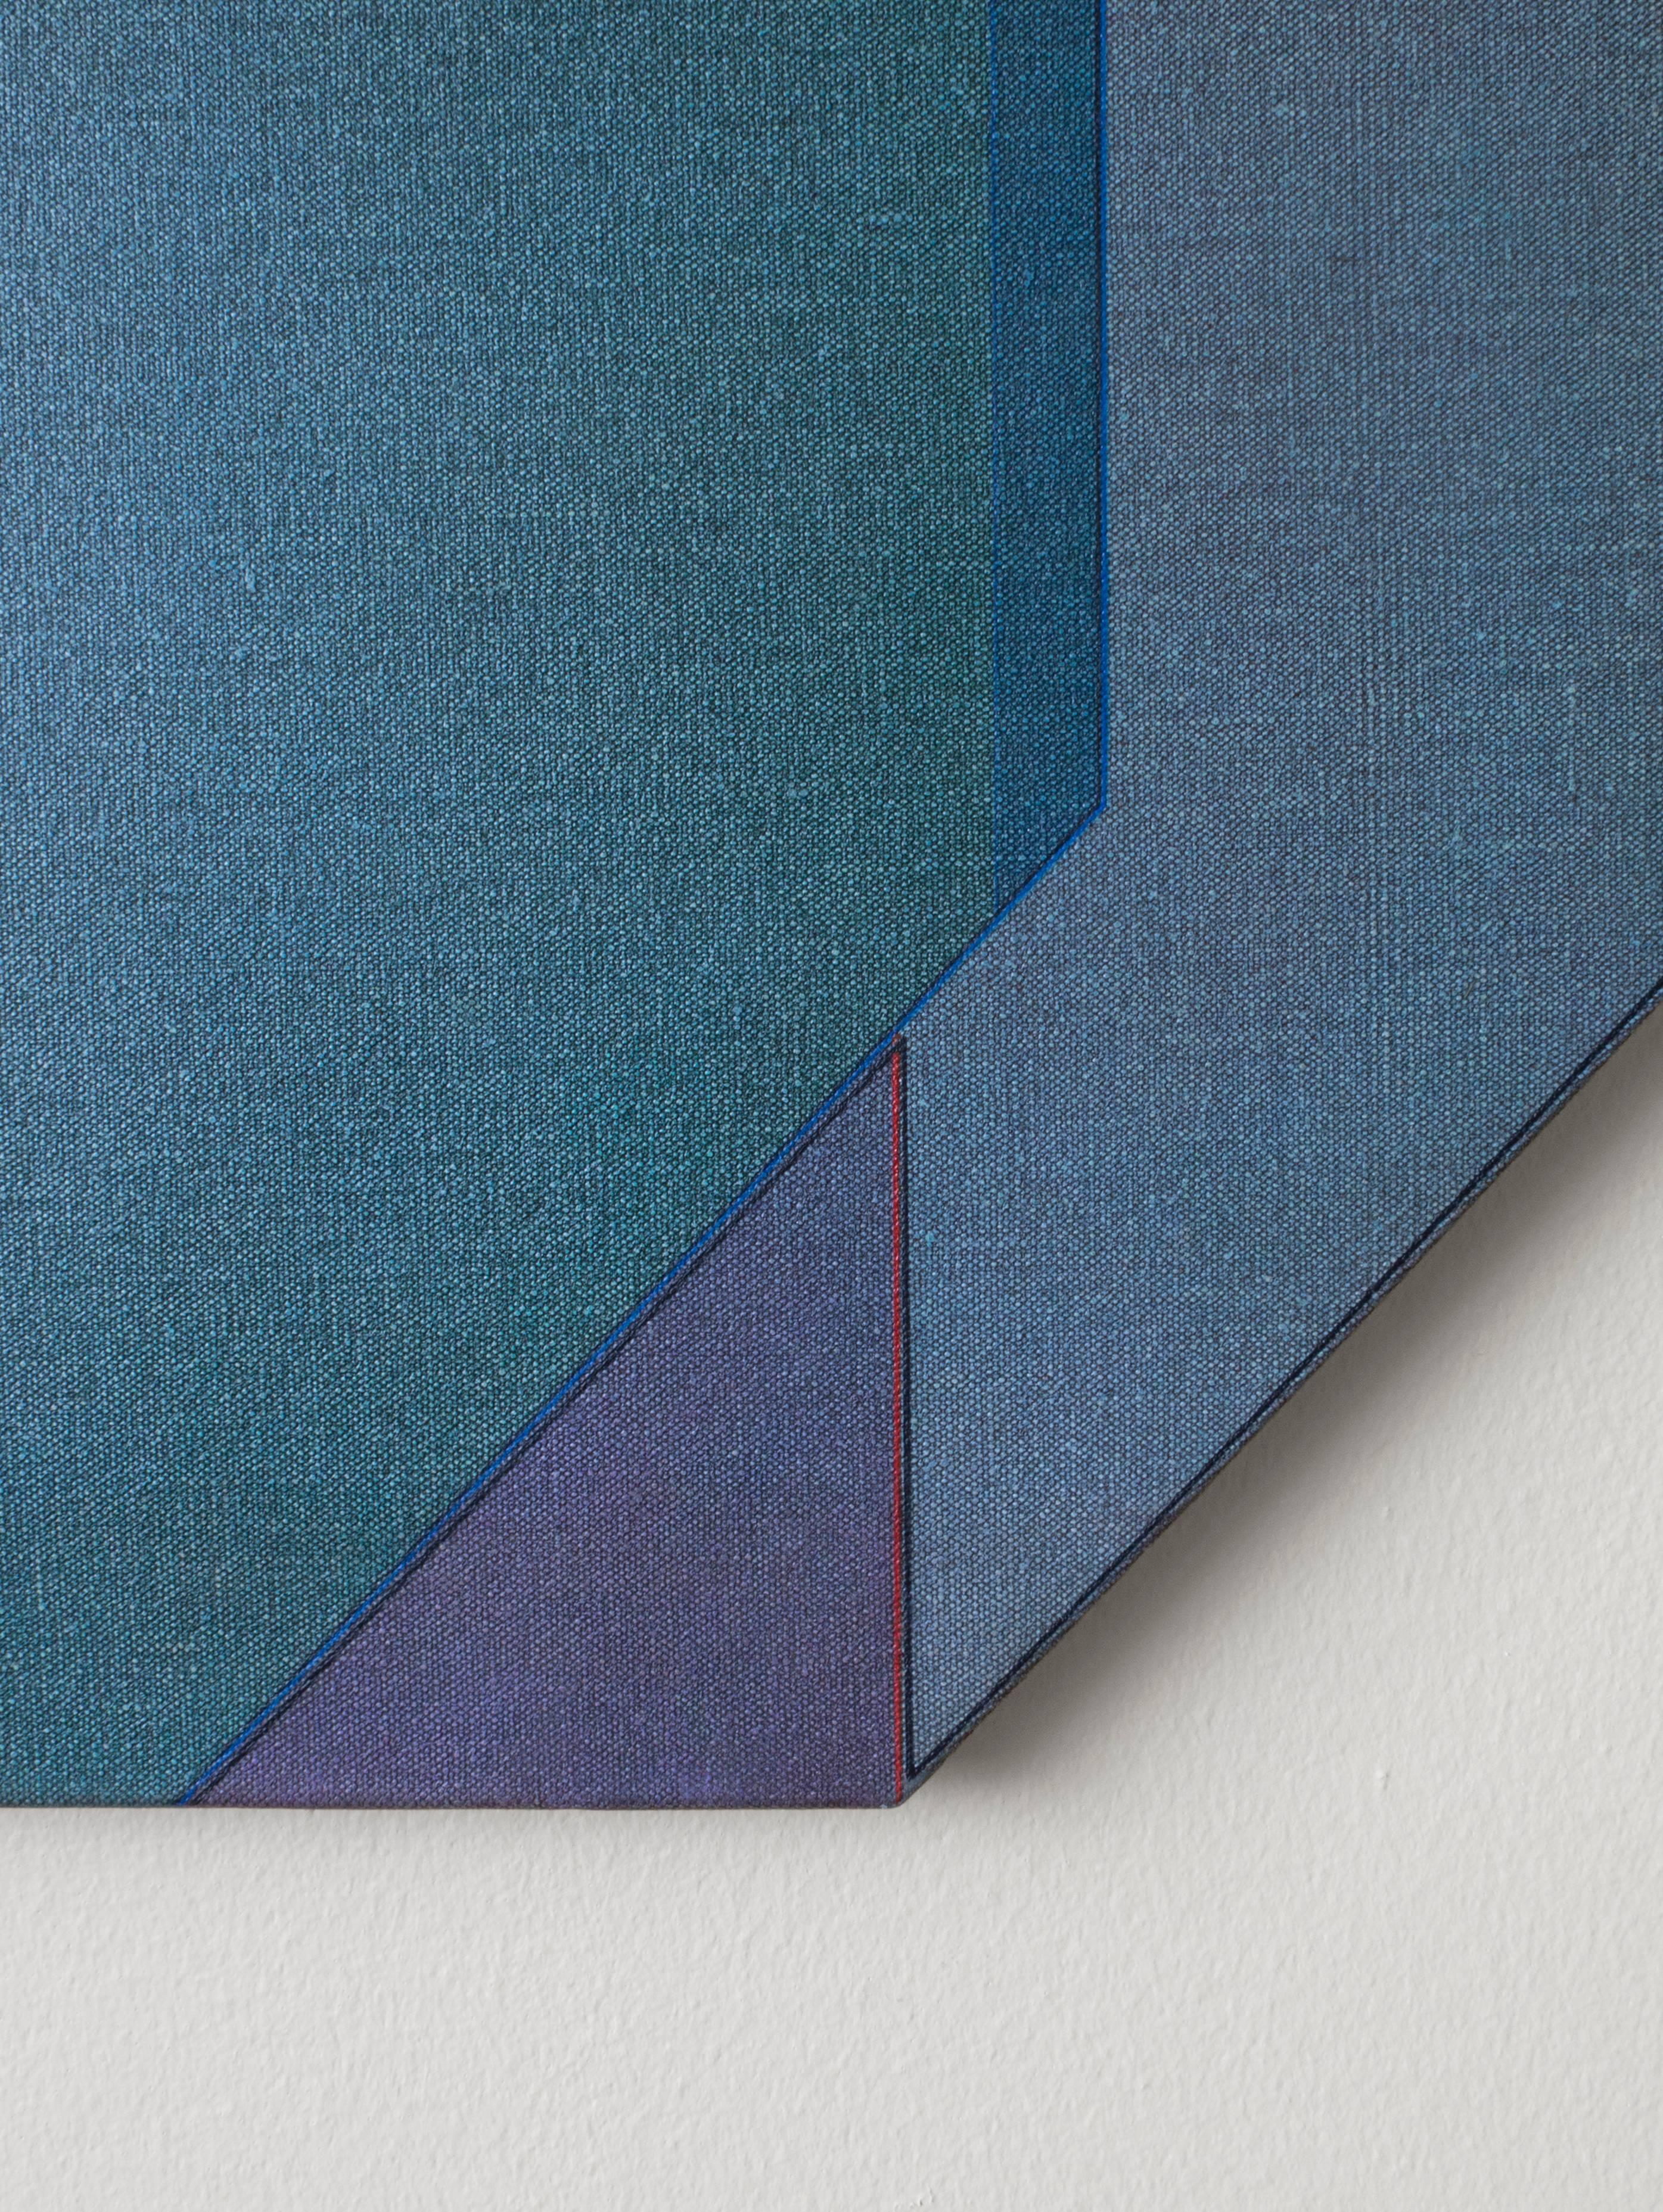 Slate blue, teal and violet pigment on canvas, stretched over a geometric frame. Signed on the reverse: Carl Magnus - 89 - 90 "Casharsis".